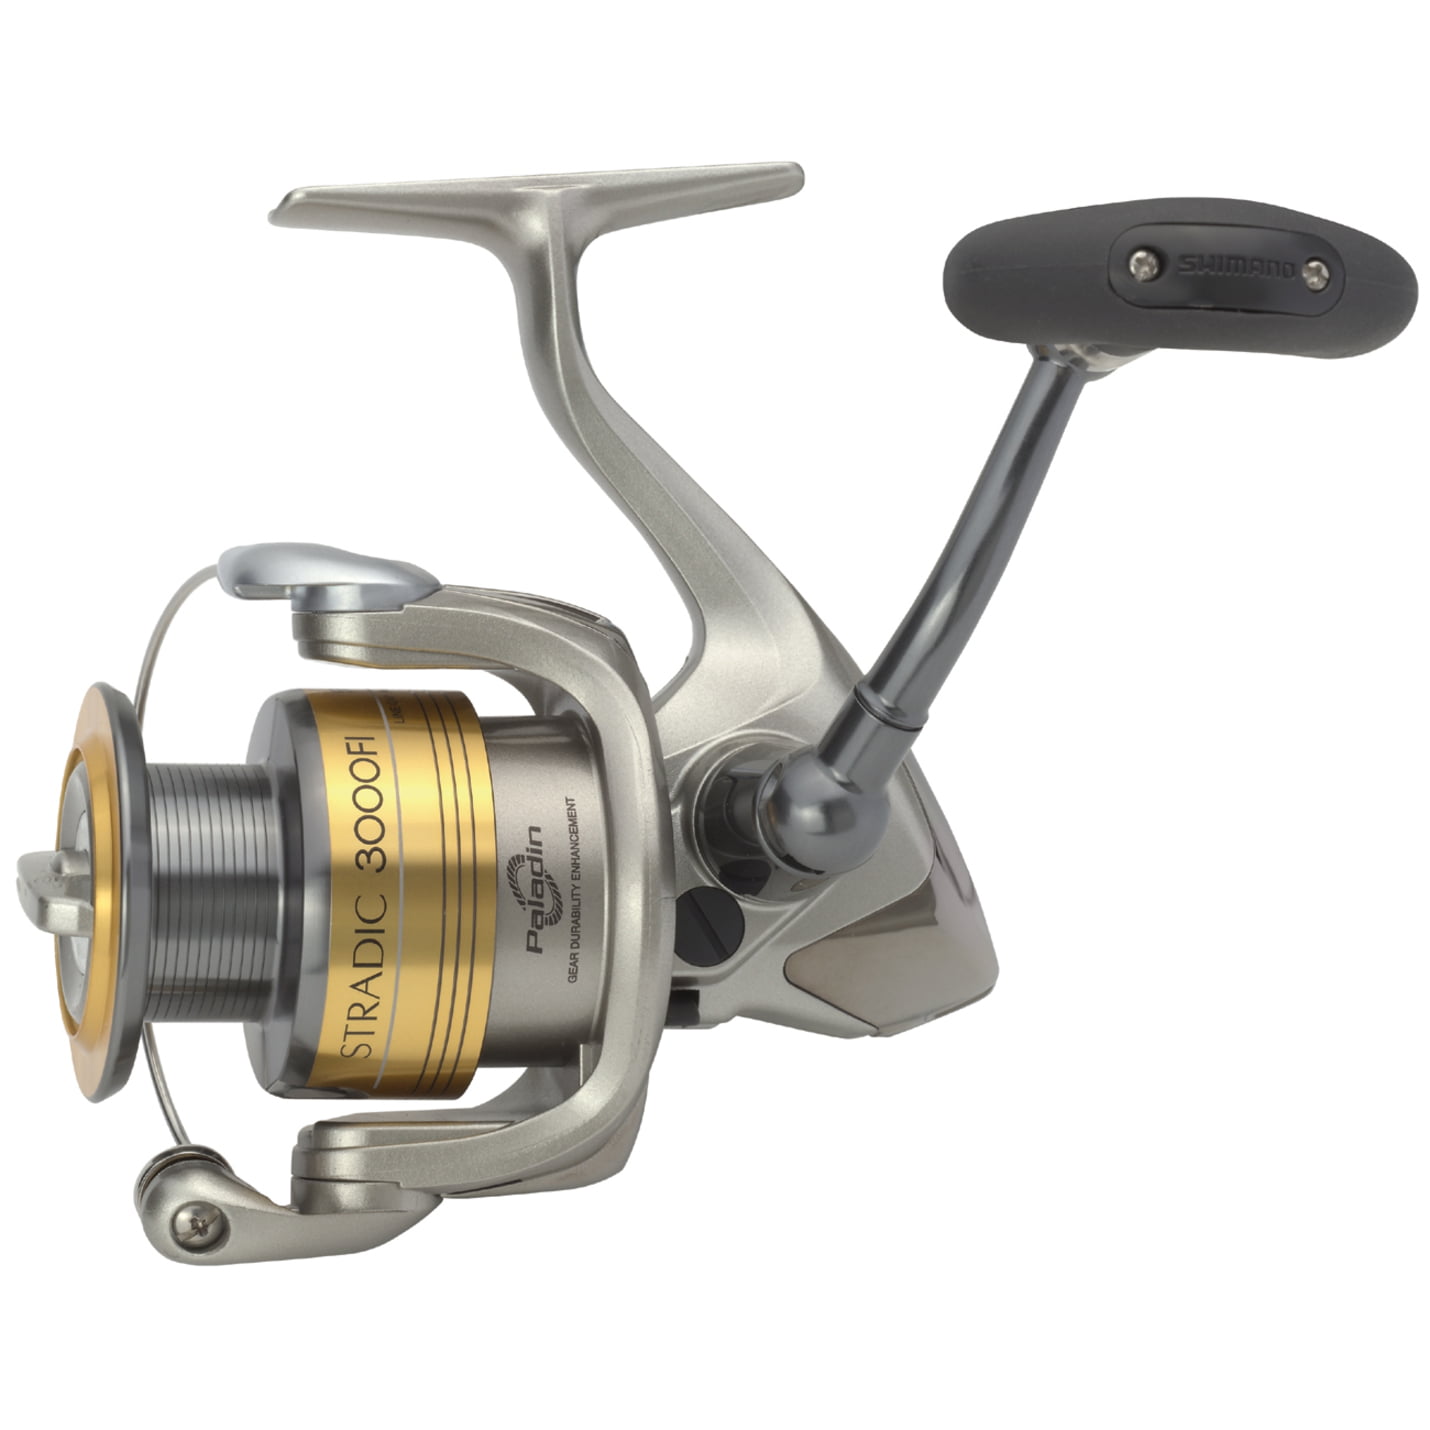 Shimano Stradic FK 2500HG 6.0:1 - Used Spinning Reel - Good Condition -  American Legacy Fishing, G Loomis Superstore